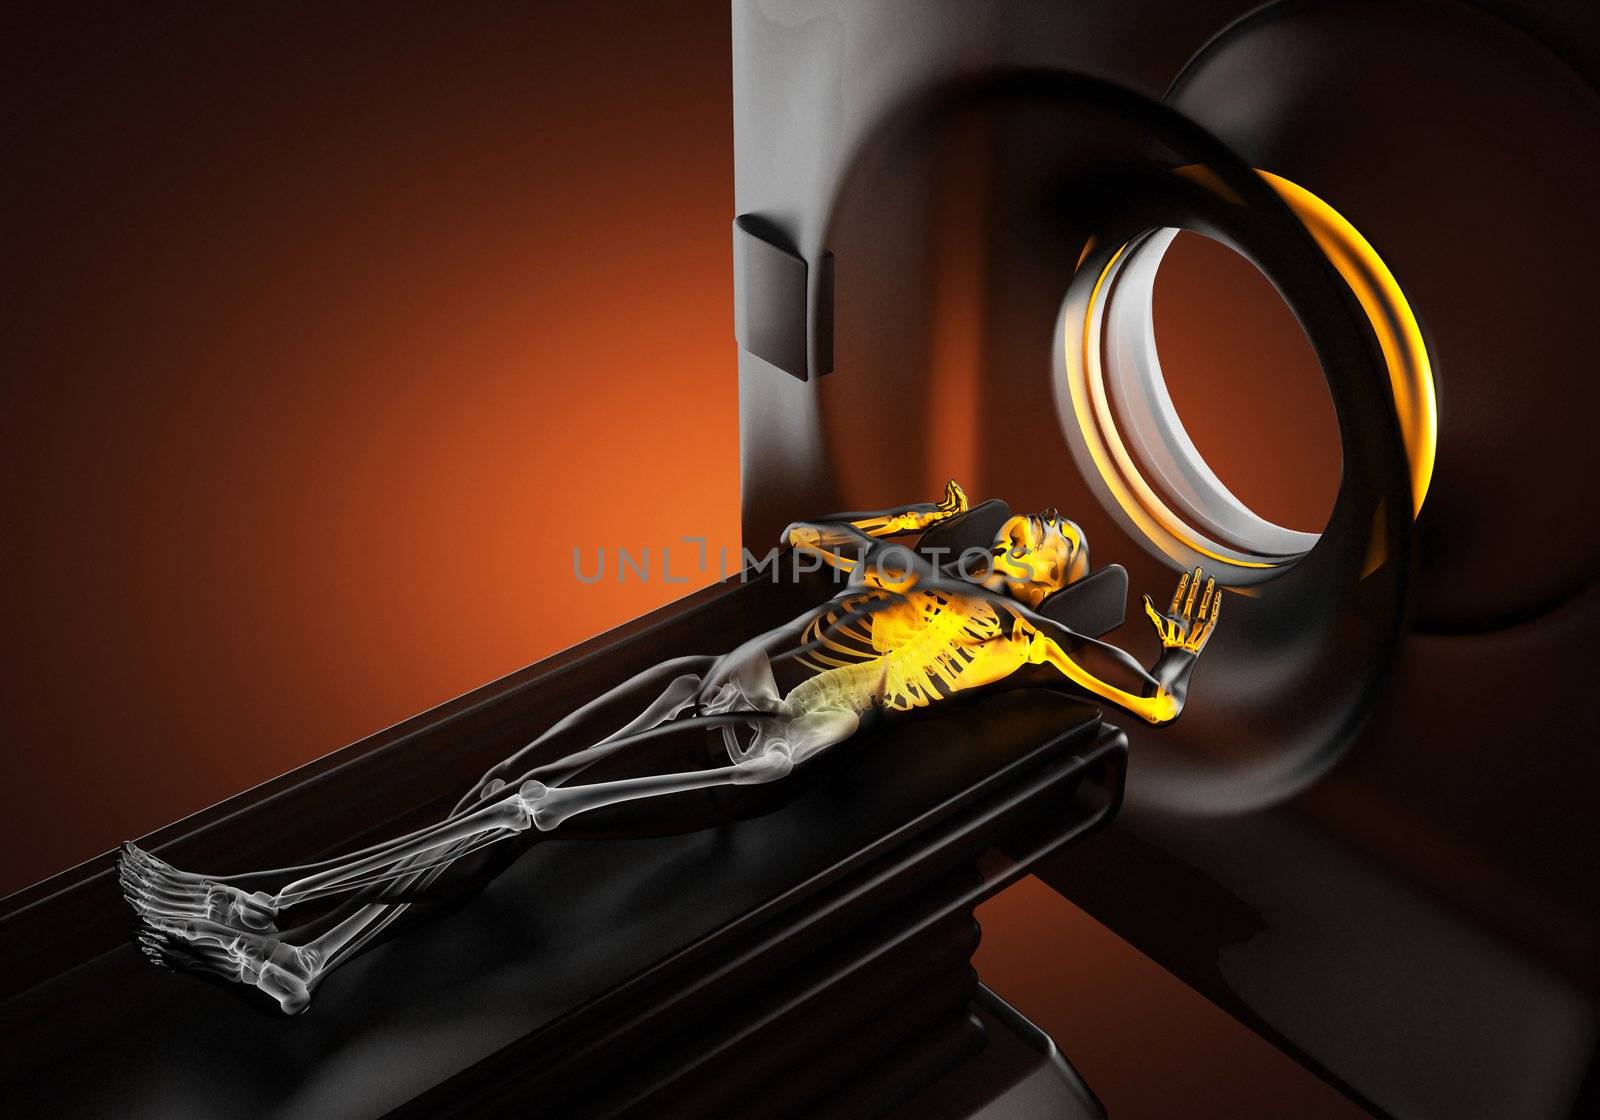 MRI examination made in 3D graphics